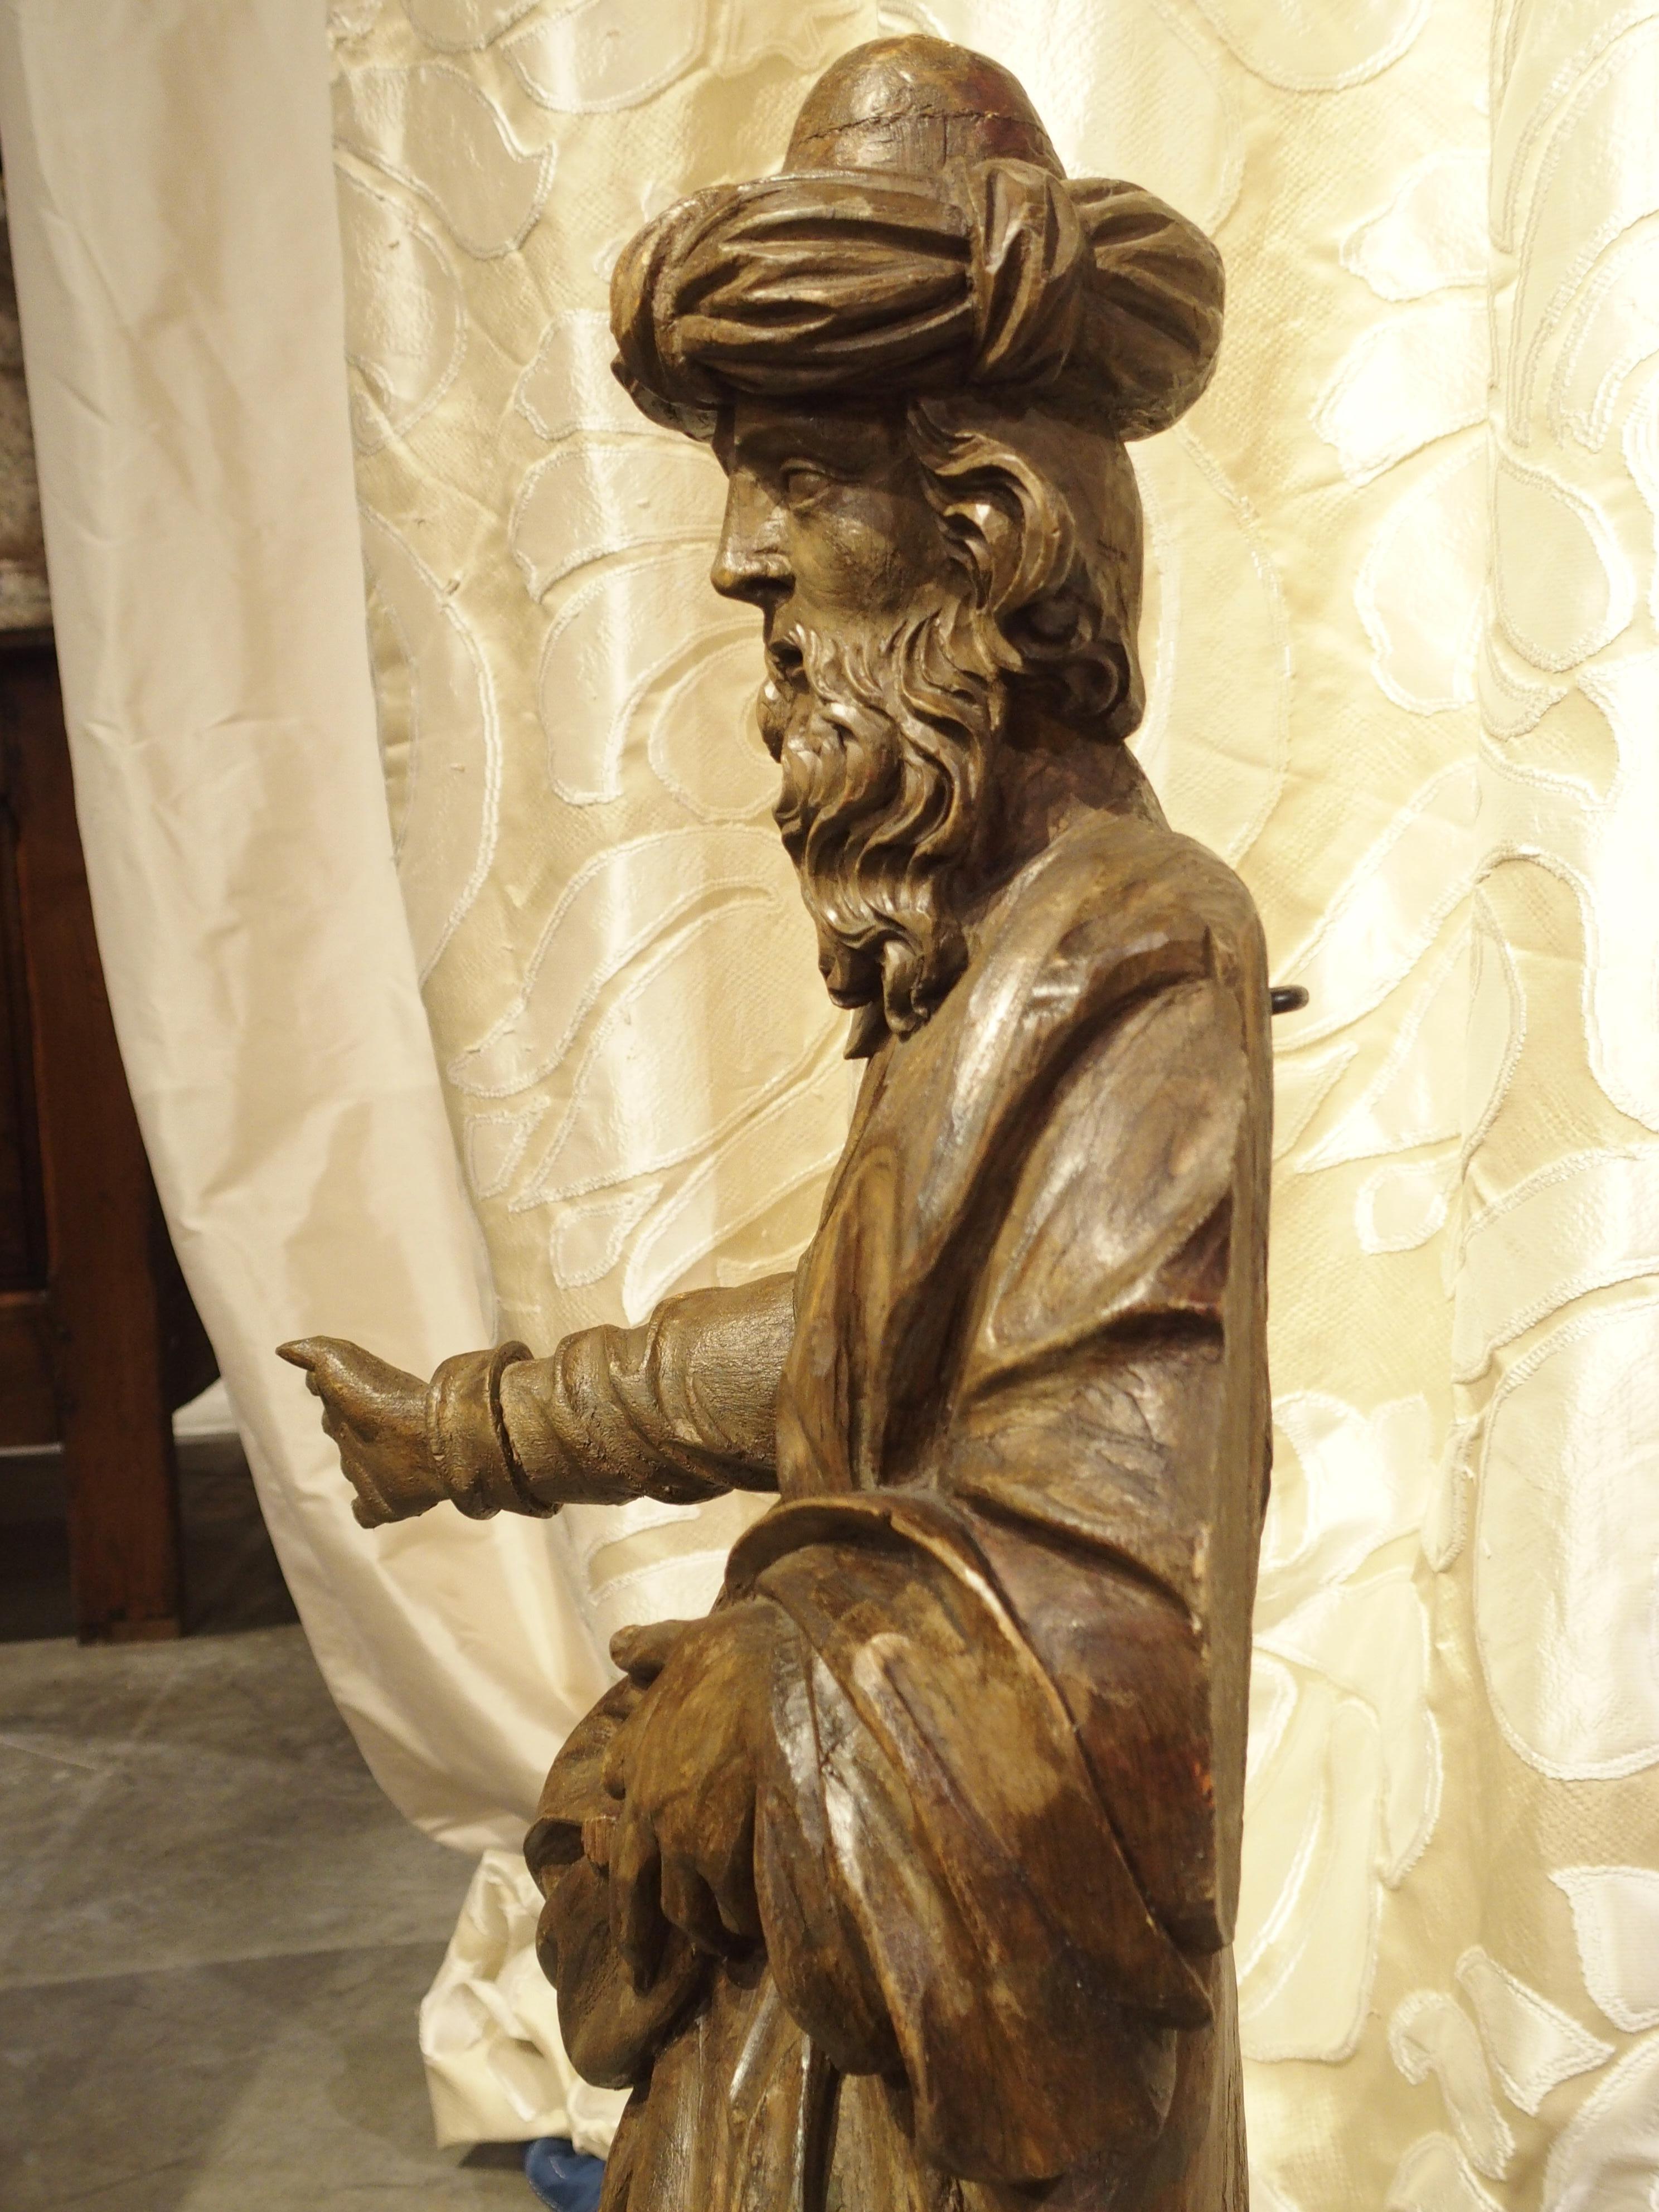 This antique French hand carved wooden statue is of a bearded man wearing a robe tied at the waist with a long scarf draped over his shoulder. The back of the statue has an opening where it was likely attached to something else at one point in time.